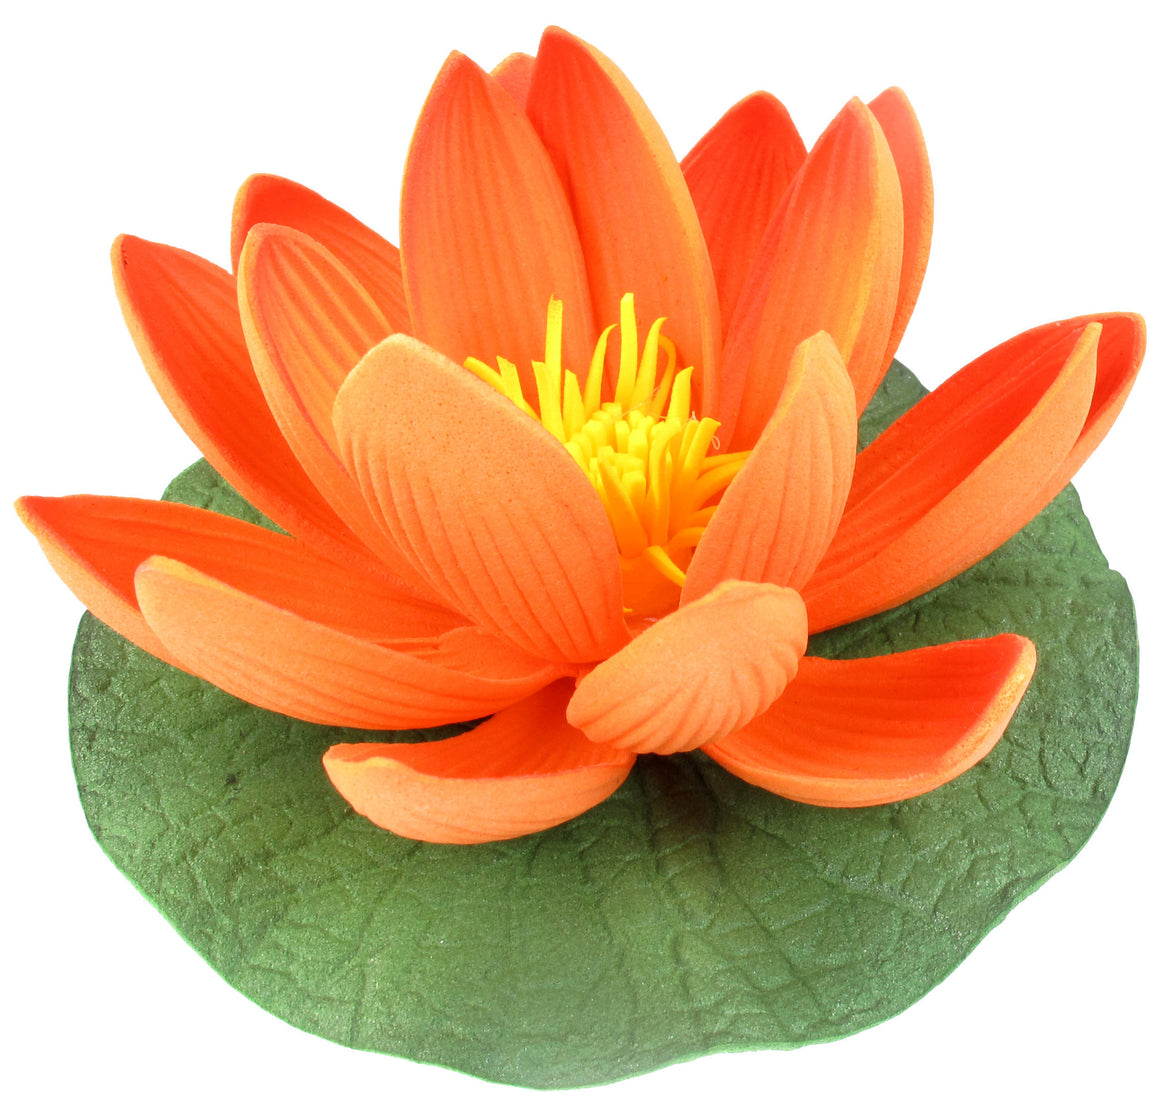 Small Floating Foam Water Lily Flower, For Small Water Feature, Approx. 3.25" x 3.5" x 2", Dark Orange - TropicaZona